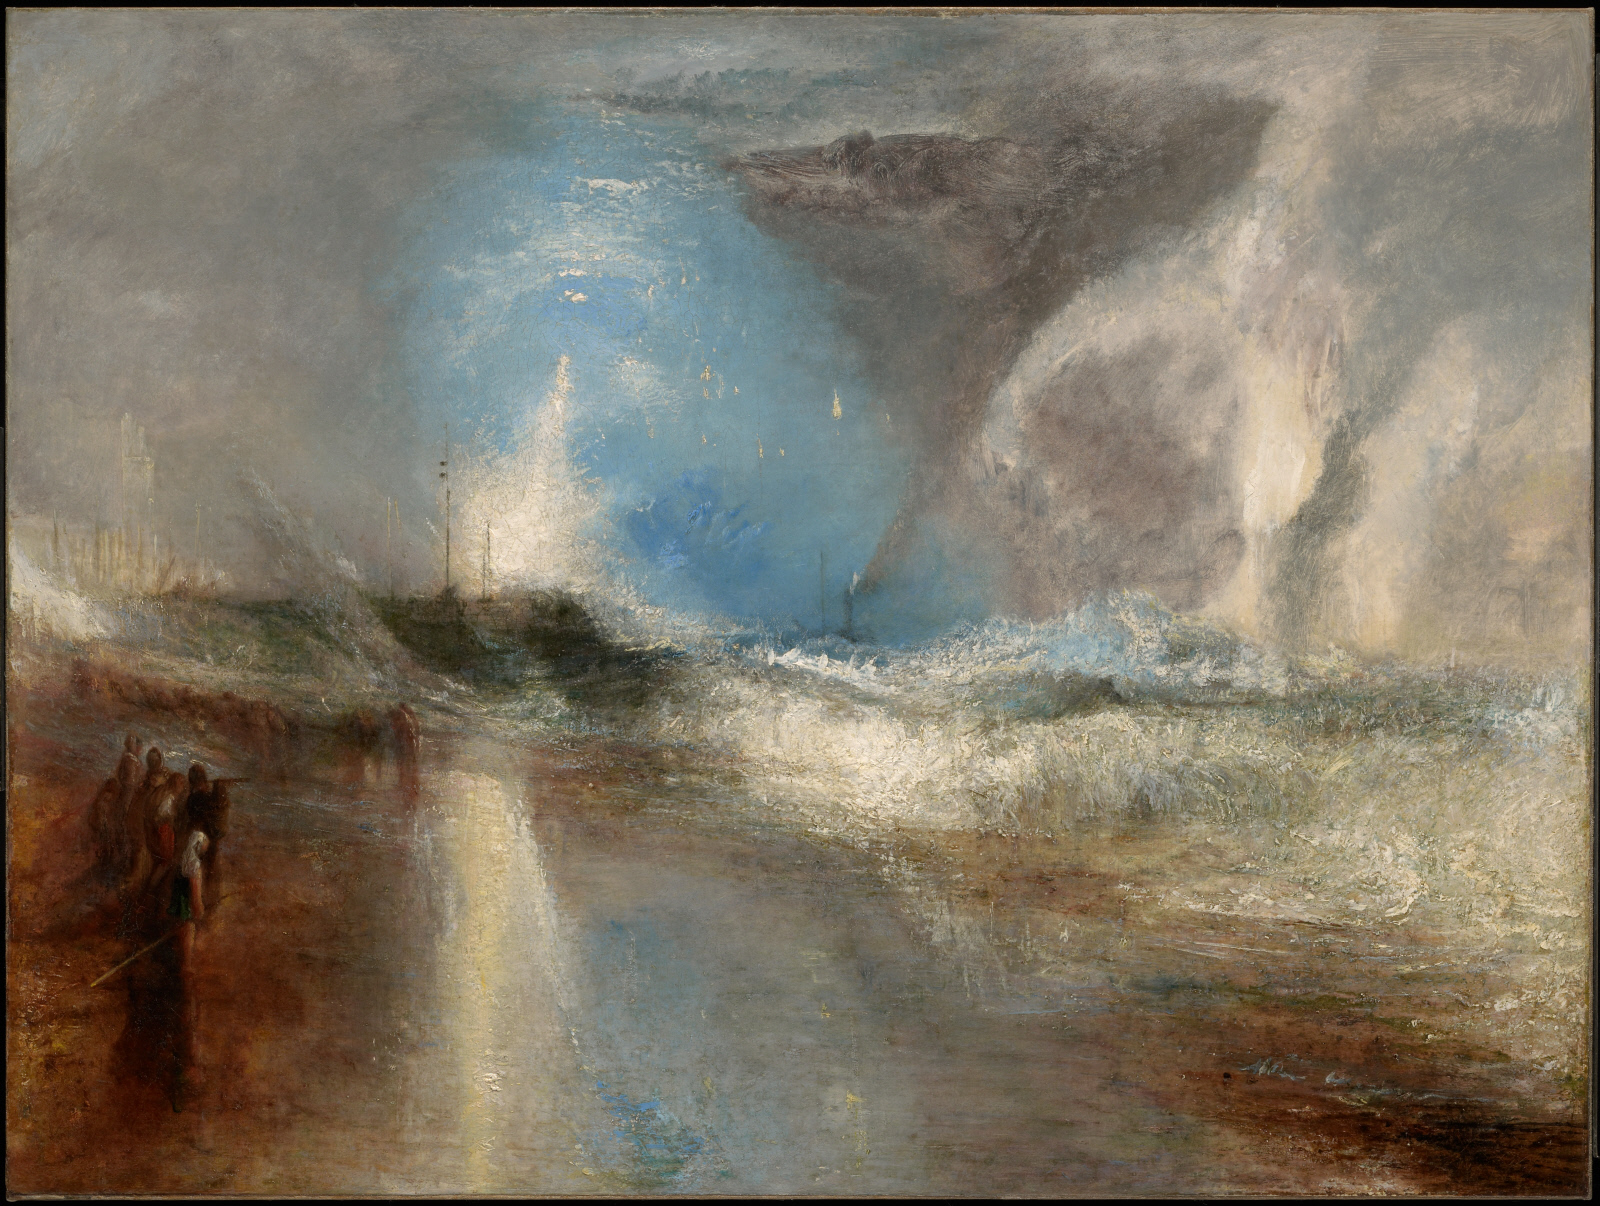 Rockets and Blue Lights (Close at Hand) to Warn Steamboats of Shoal Water by Joseph Mallord William Turner - 1840 - 92.1 x 122.2 cm The Clark